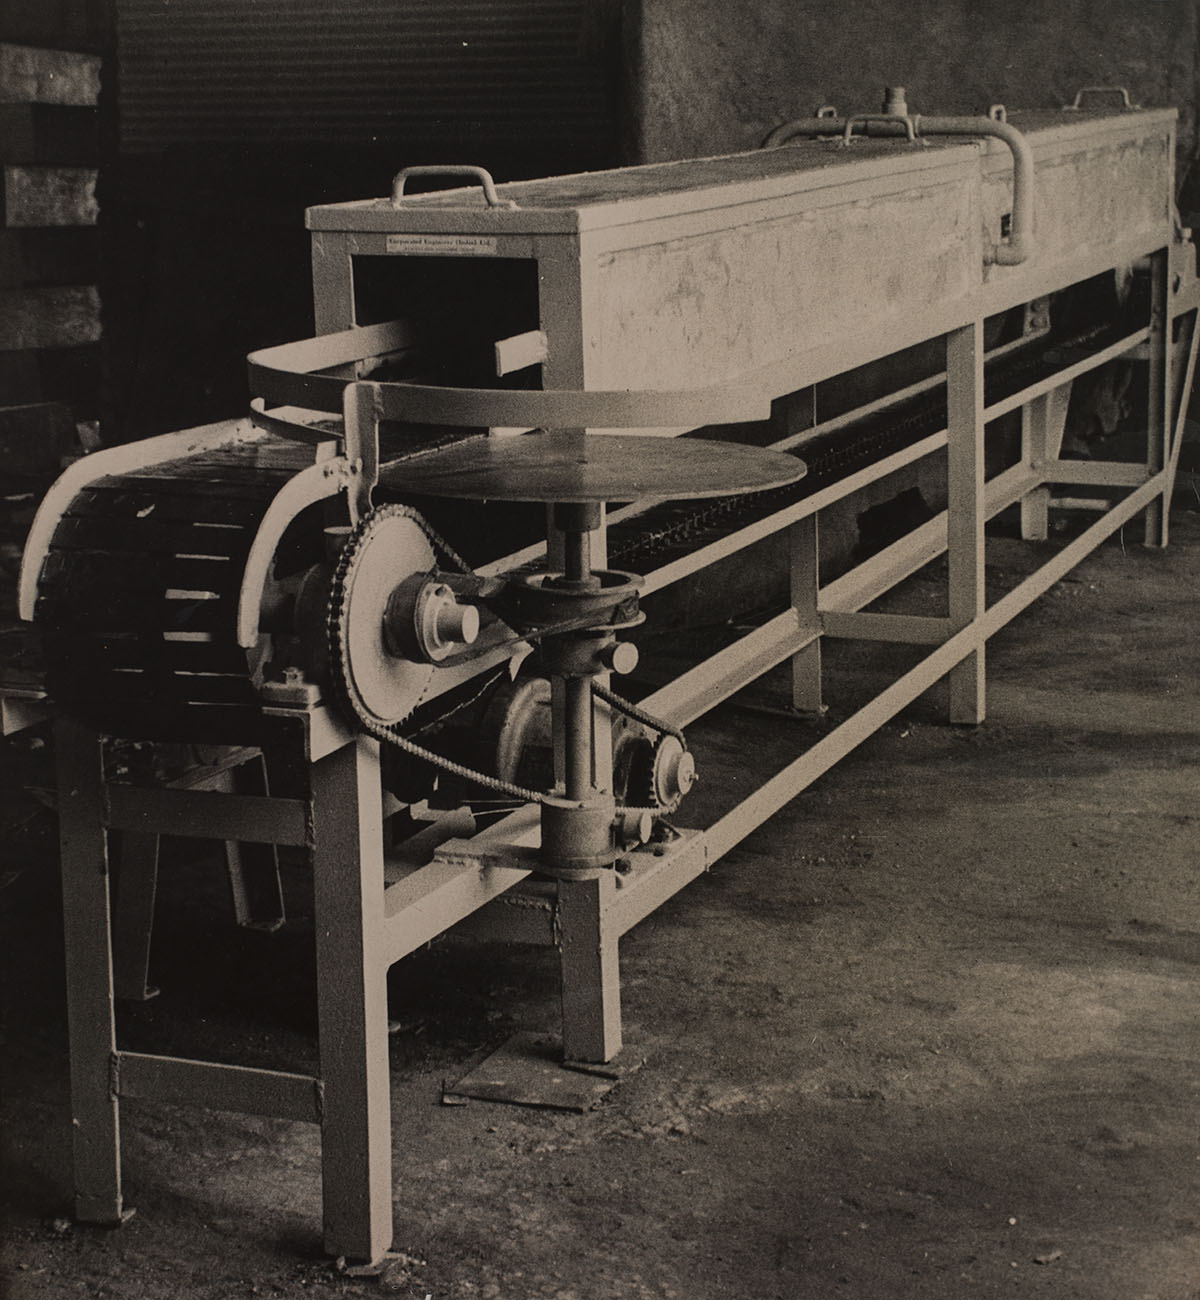 A sepia-toned photograph of an industrial cutting machine inside a factory.